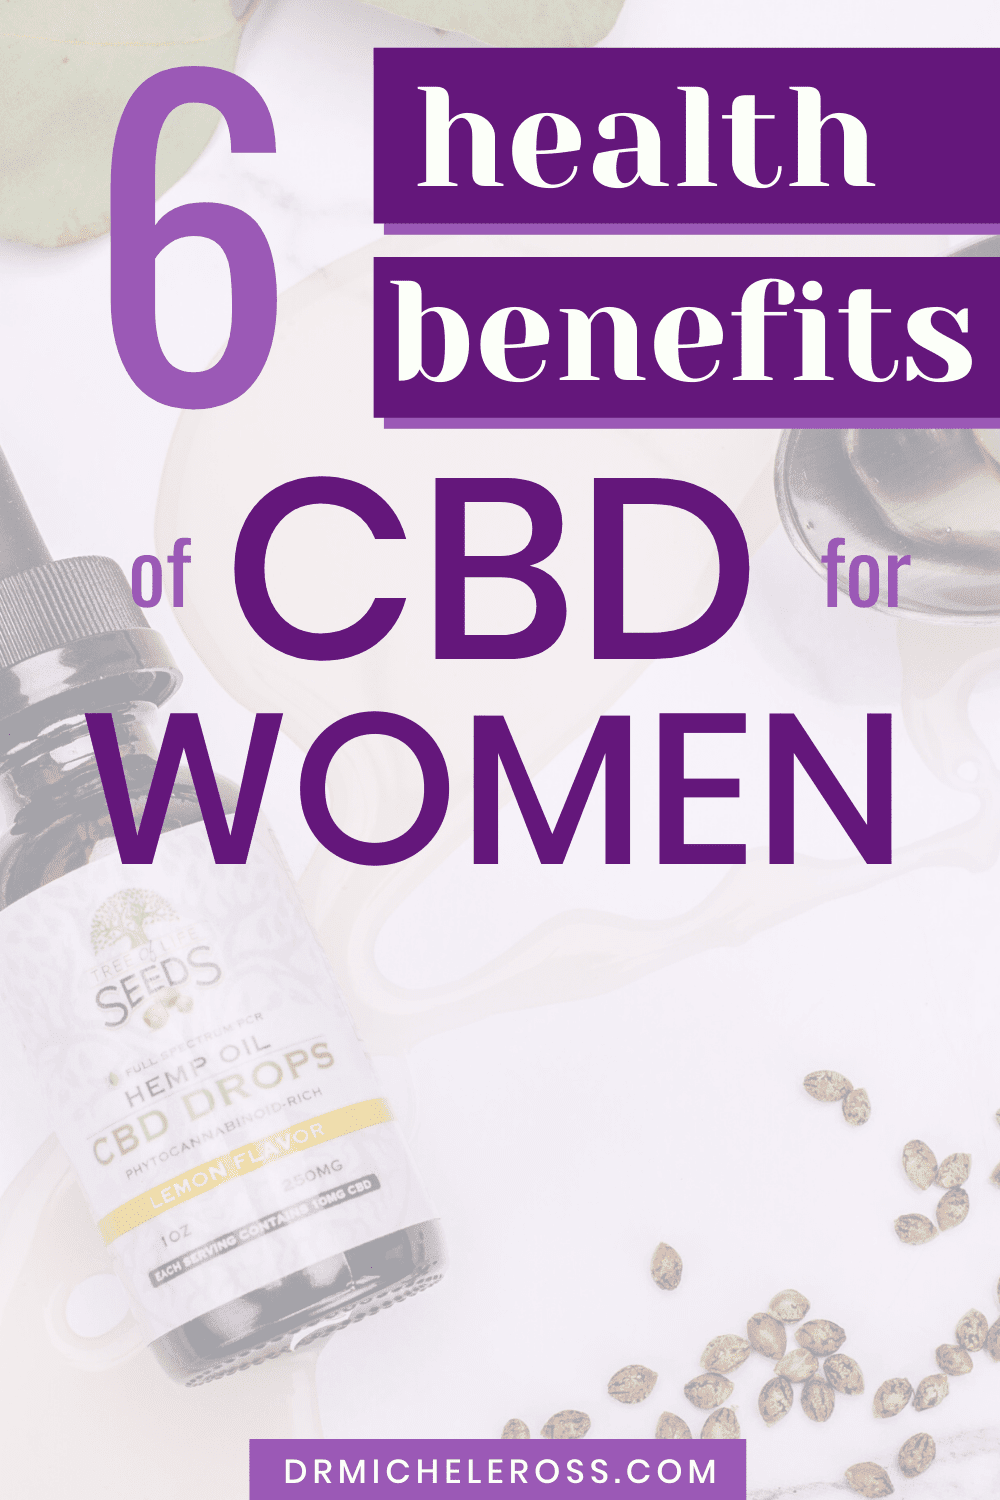 cbd oil can help menopause and period cramps in women